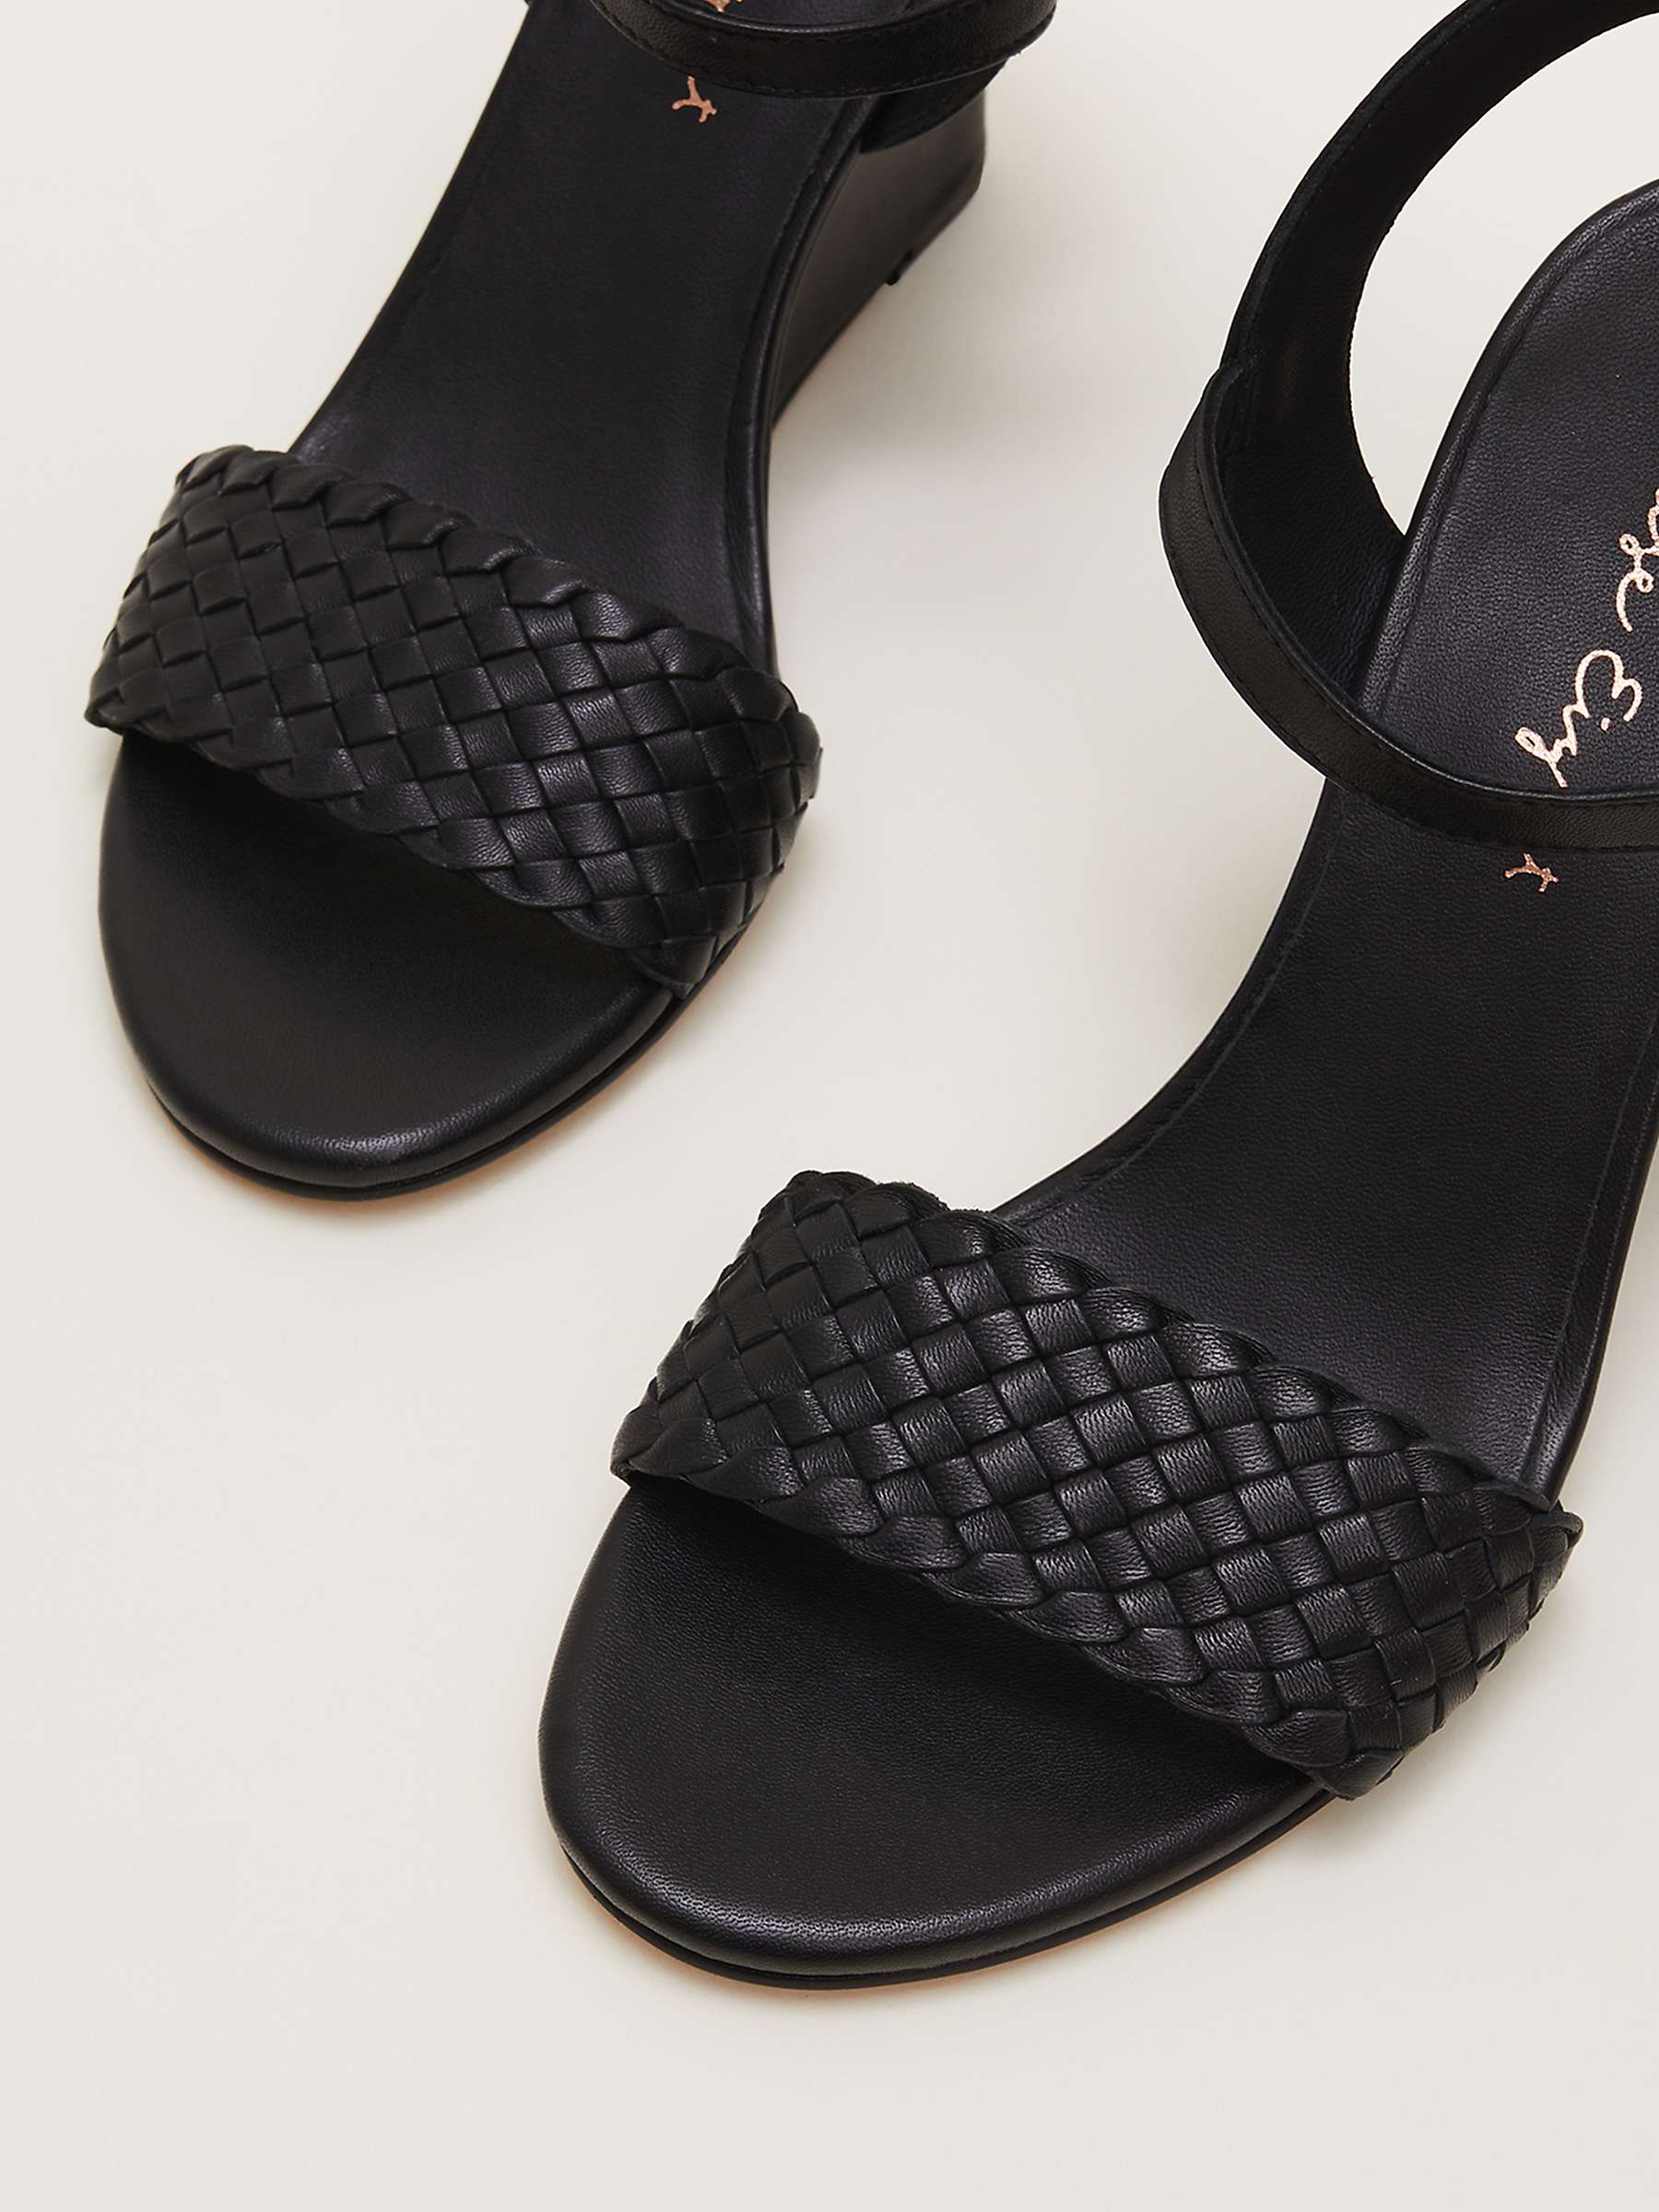 Buy Phase Eight Leather Plait Strap Sandals Online at johnlewis.com